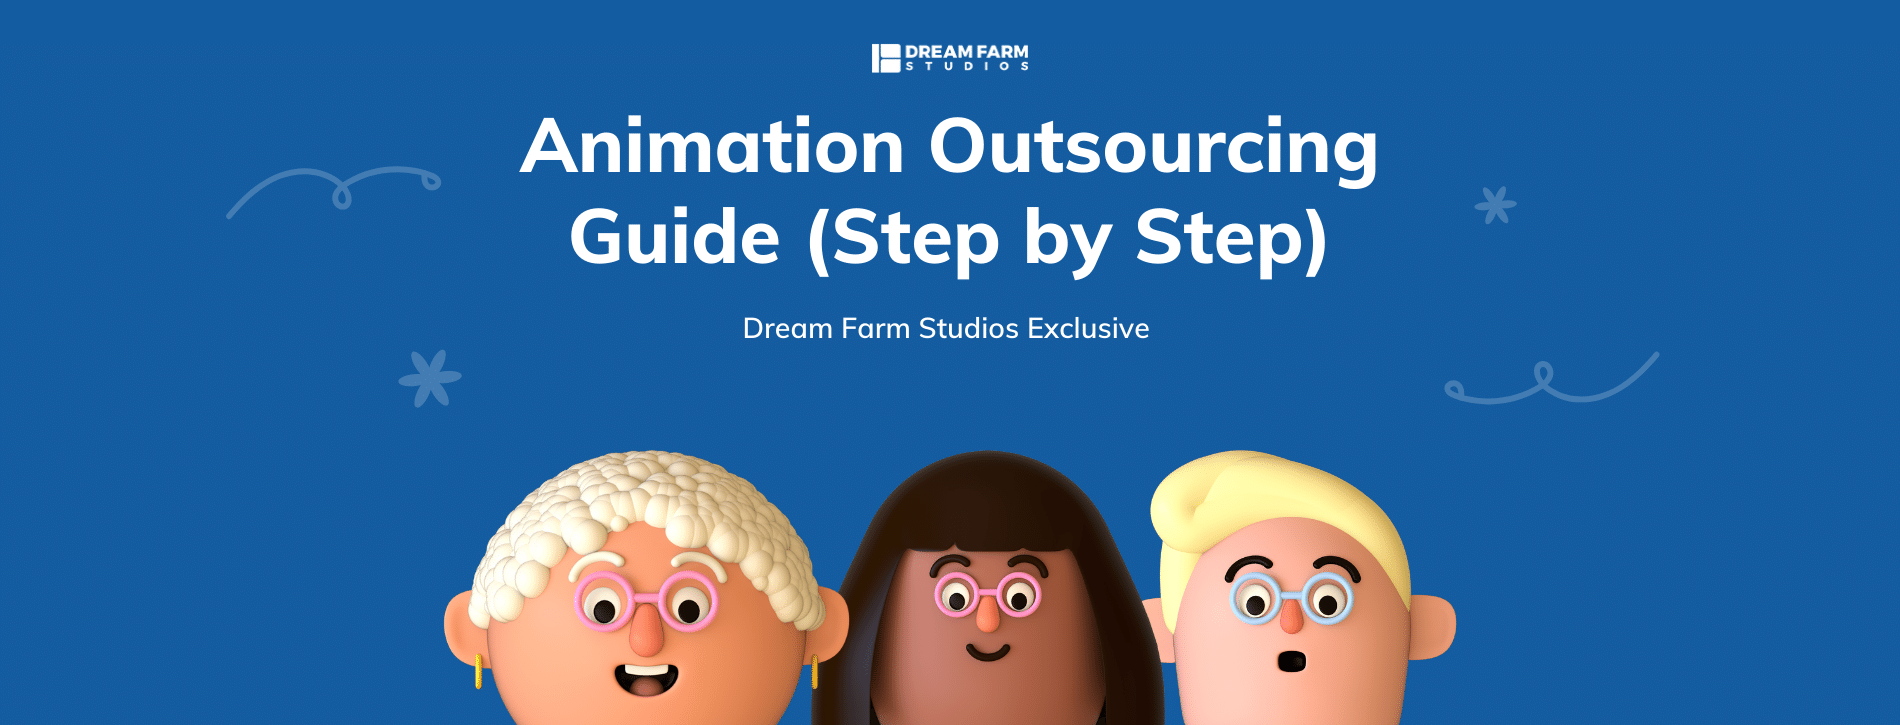 Animation Outsourcing, Step-by-Step Guide for maximum success